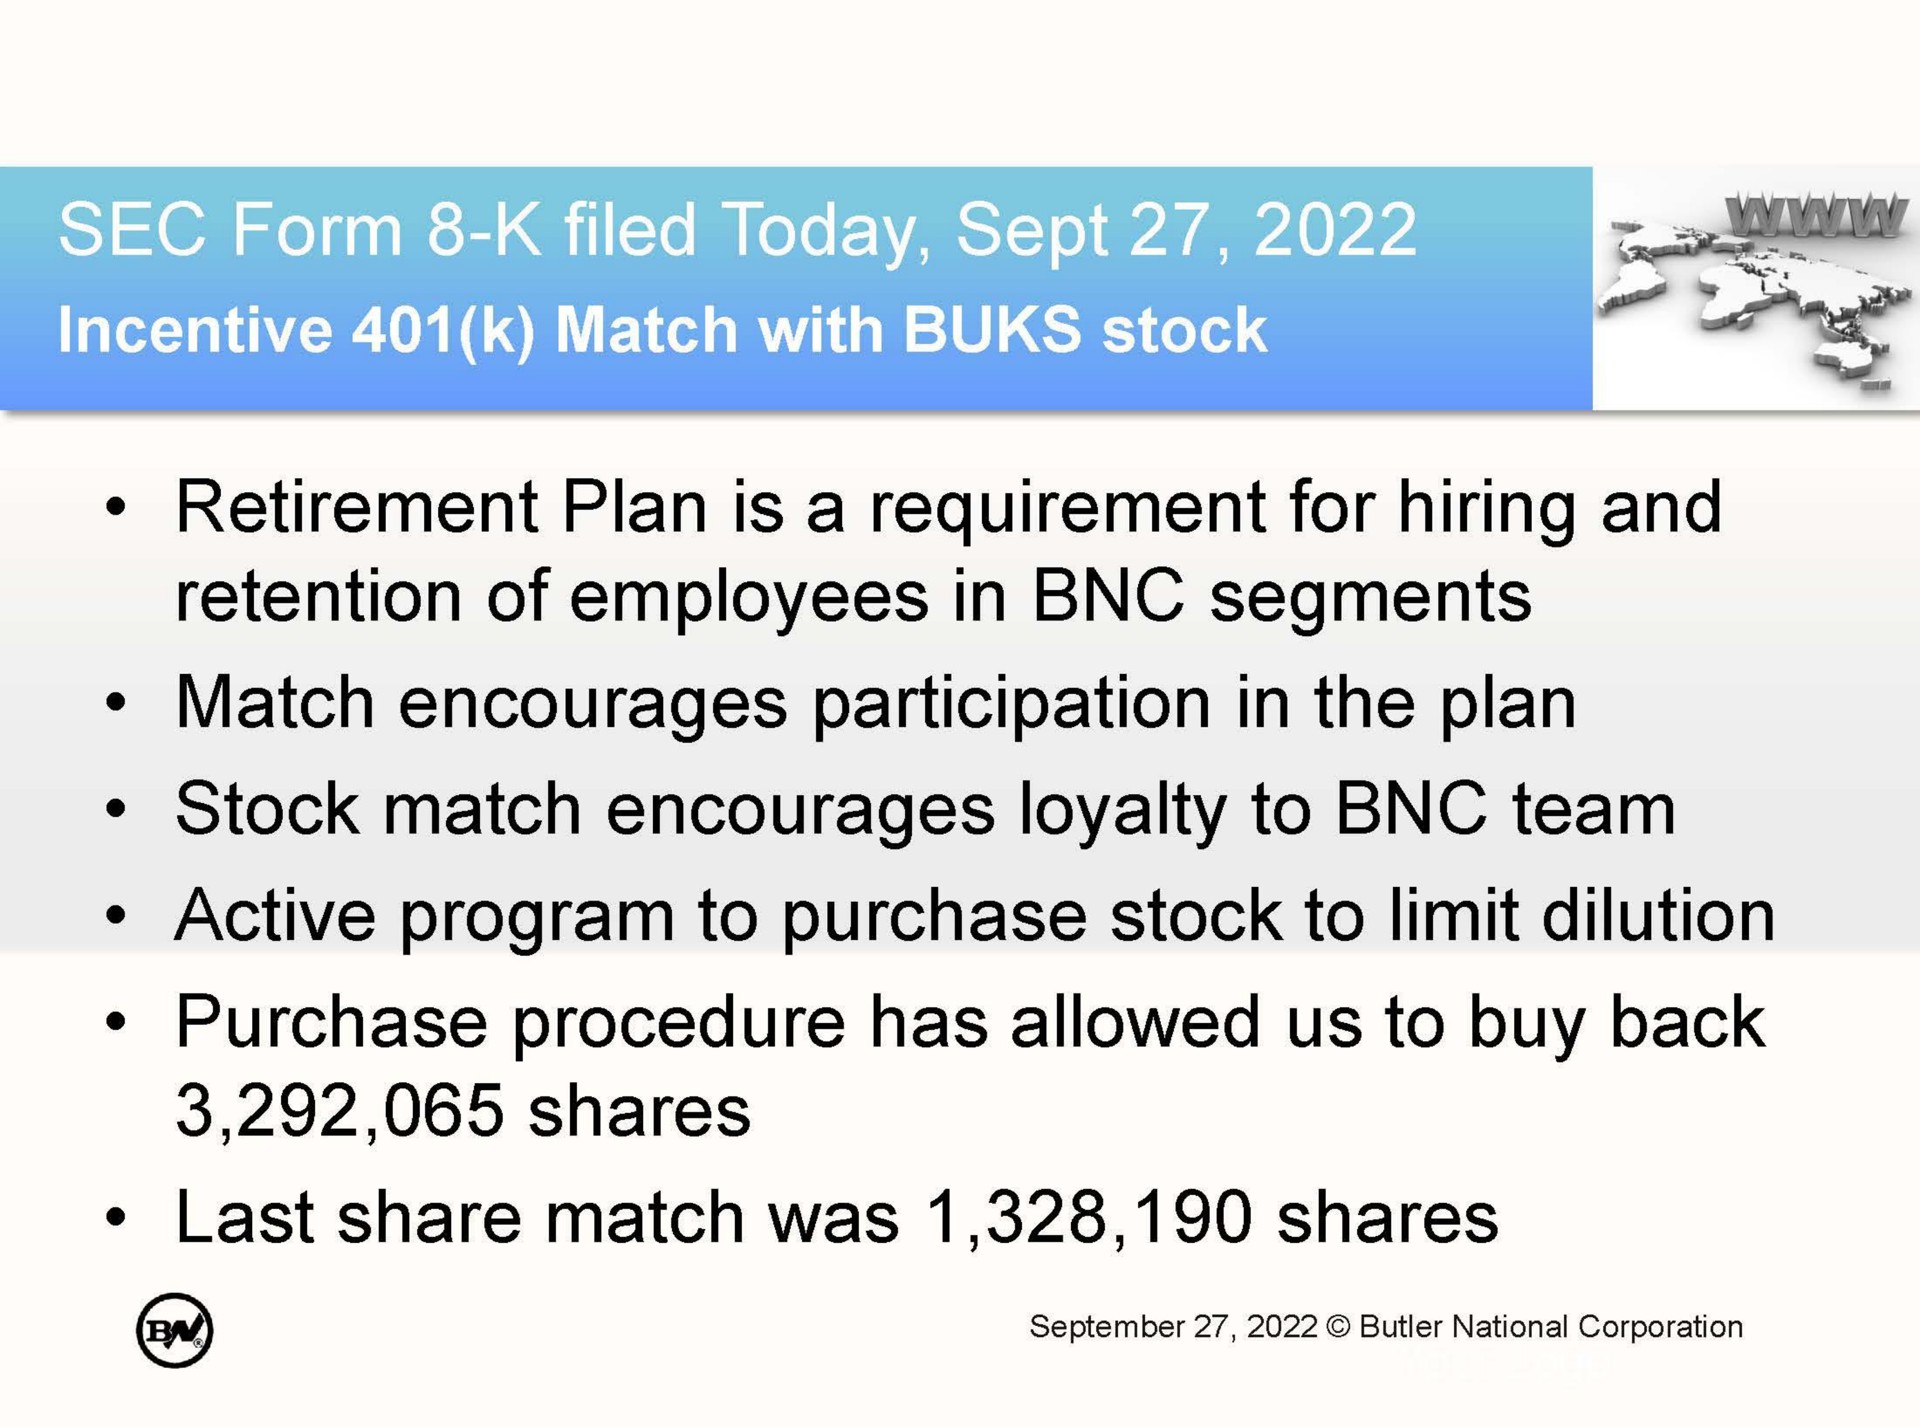 retirement plan is a requirement for hiring and retention of employees in segments match encourages participation in the plan stock match encourages loyalty to team active program to purchase stock to limit dilution purchase procedure has allowed us to buy back shares last share match was shares | Butler National Corporation